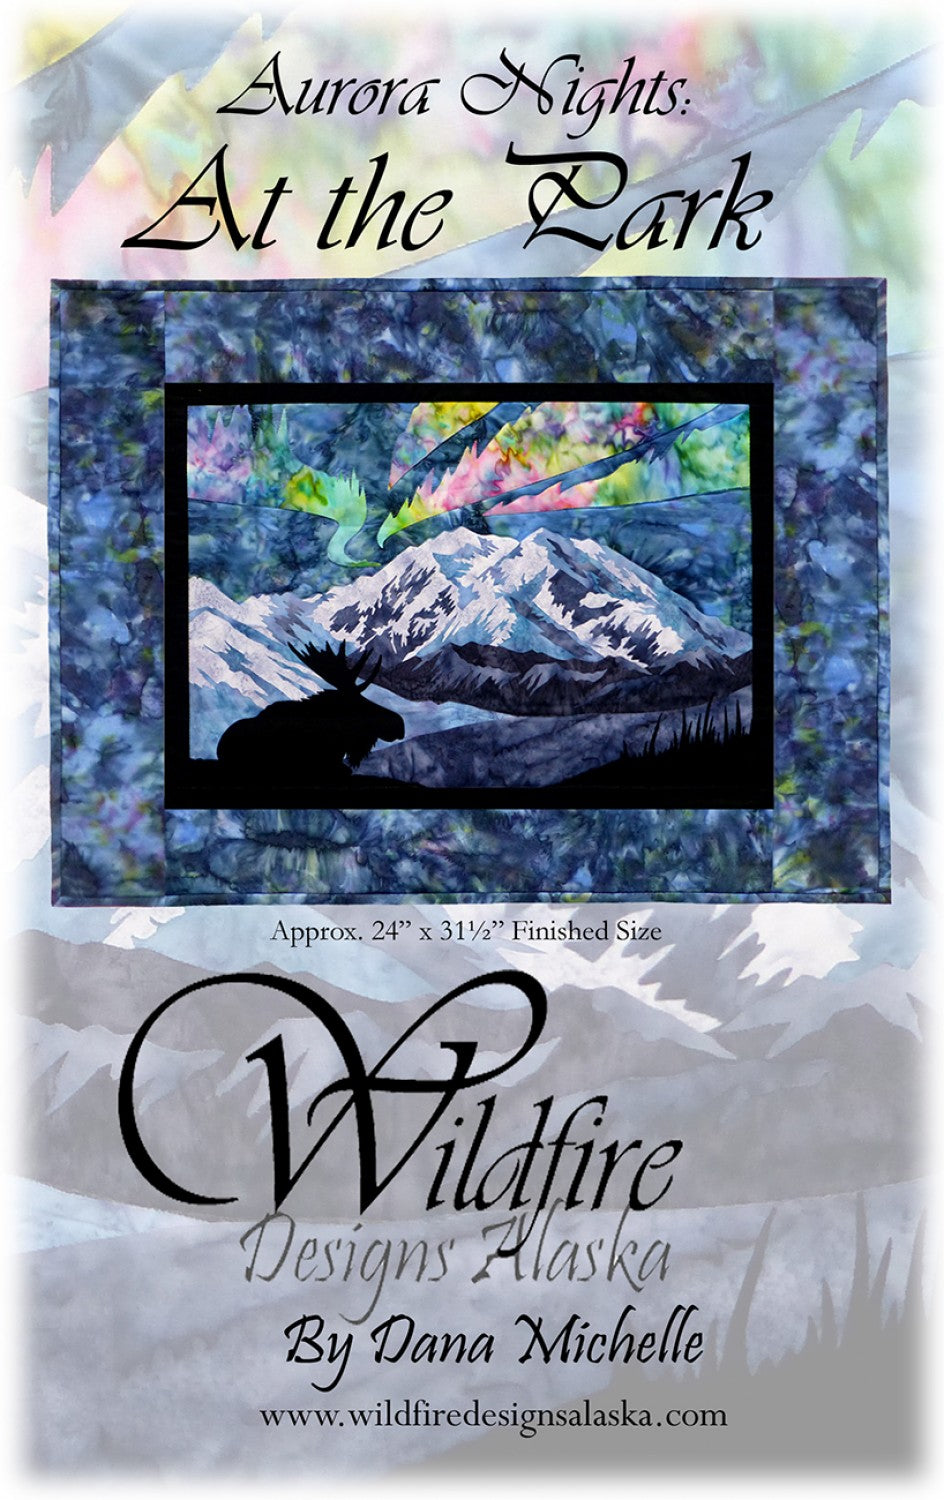 Wildfire Designs Alaska Aurora Nights At the Park Applique Quilt Pattern Front Cover